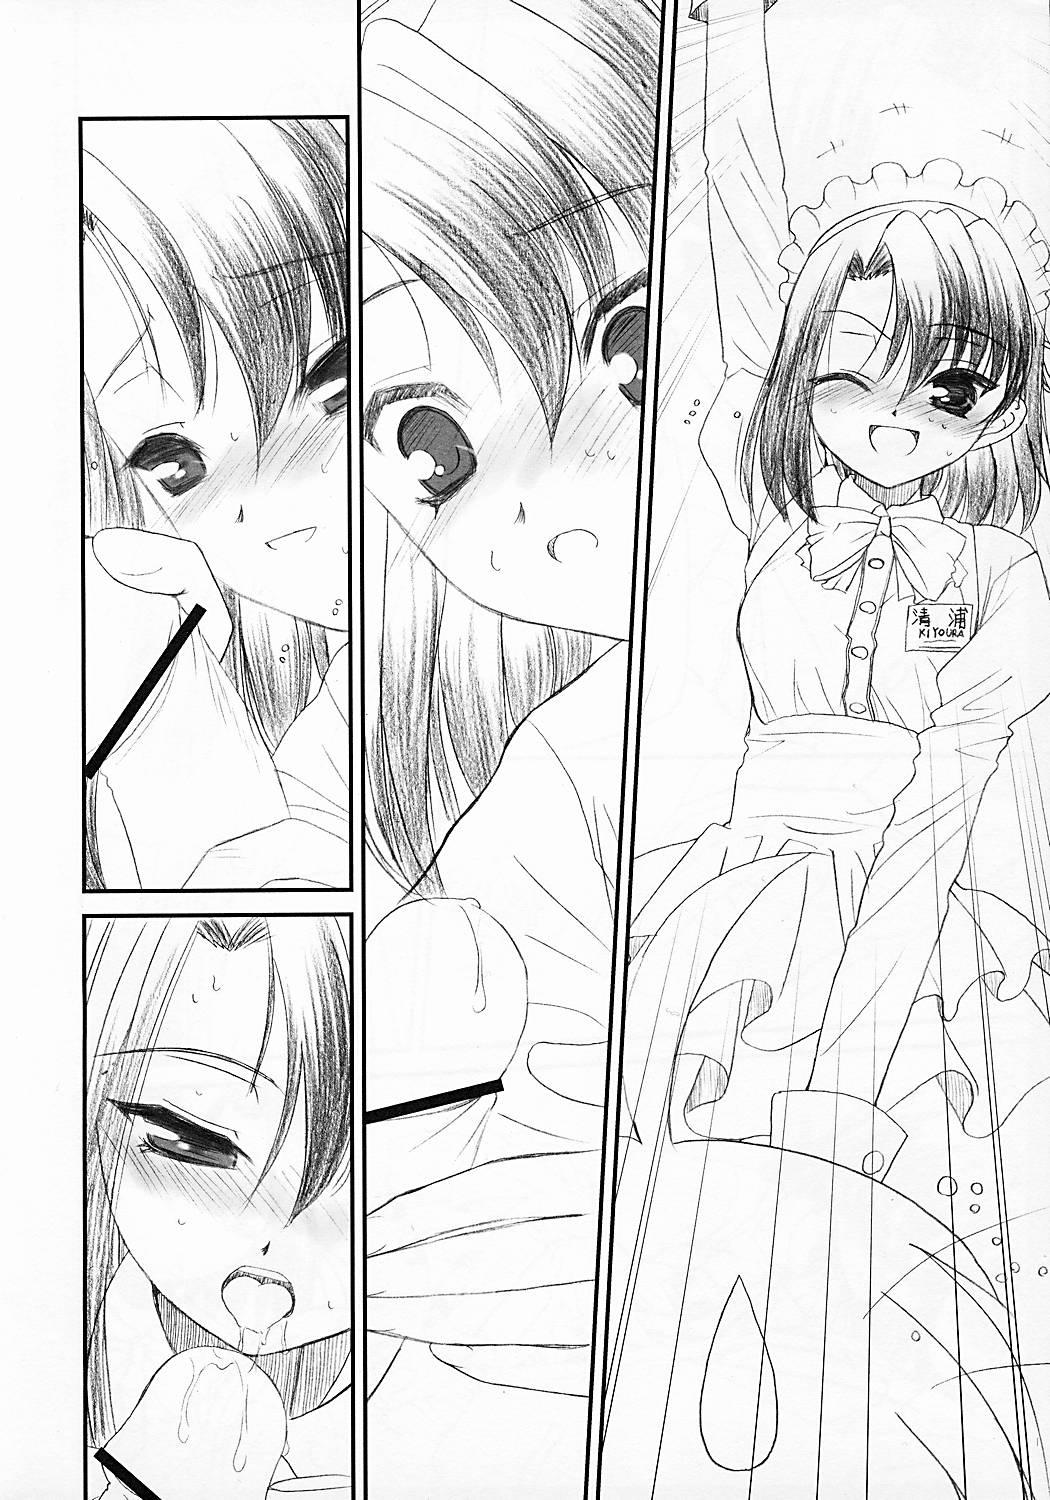 Blows Secchan no Himichu - Prototype ver. 0.01 - School days Ejaculation - Page 4